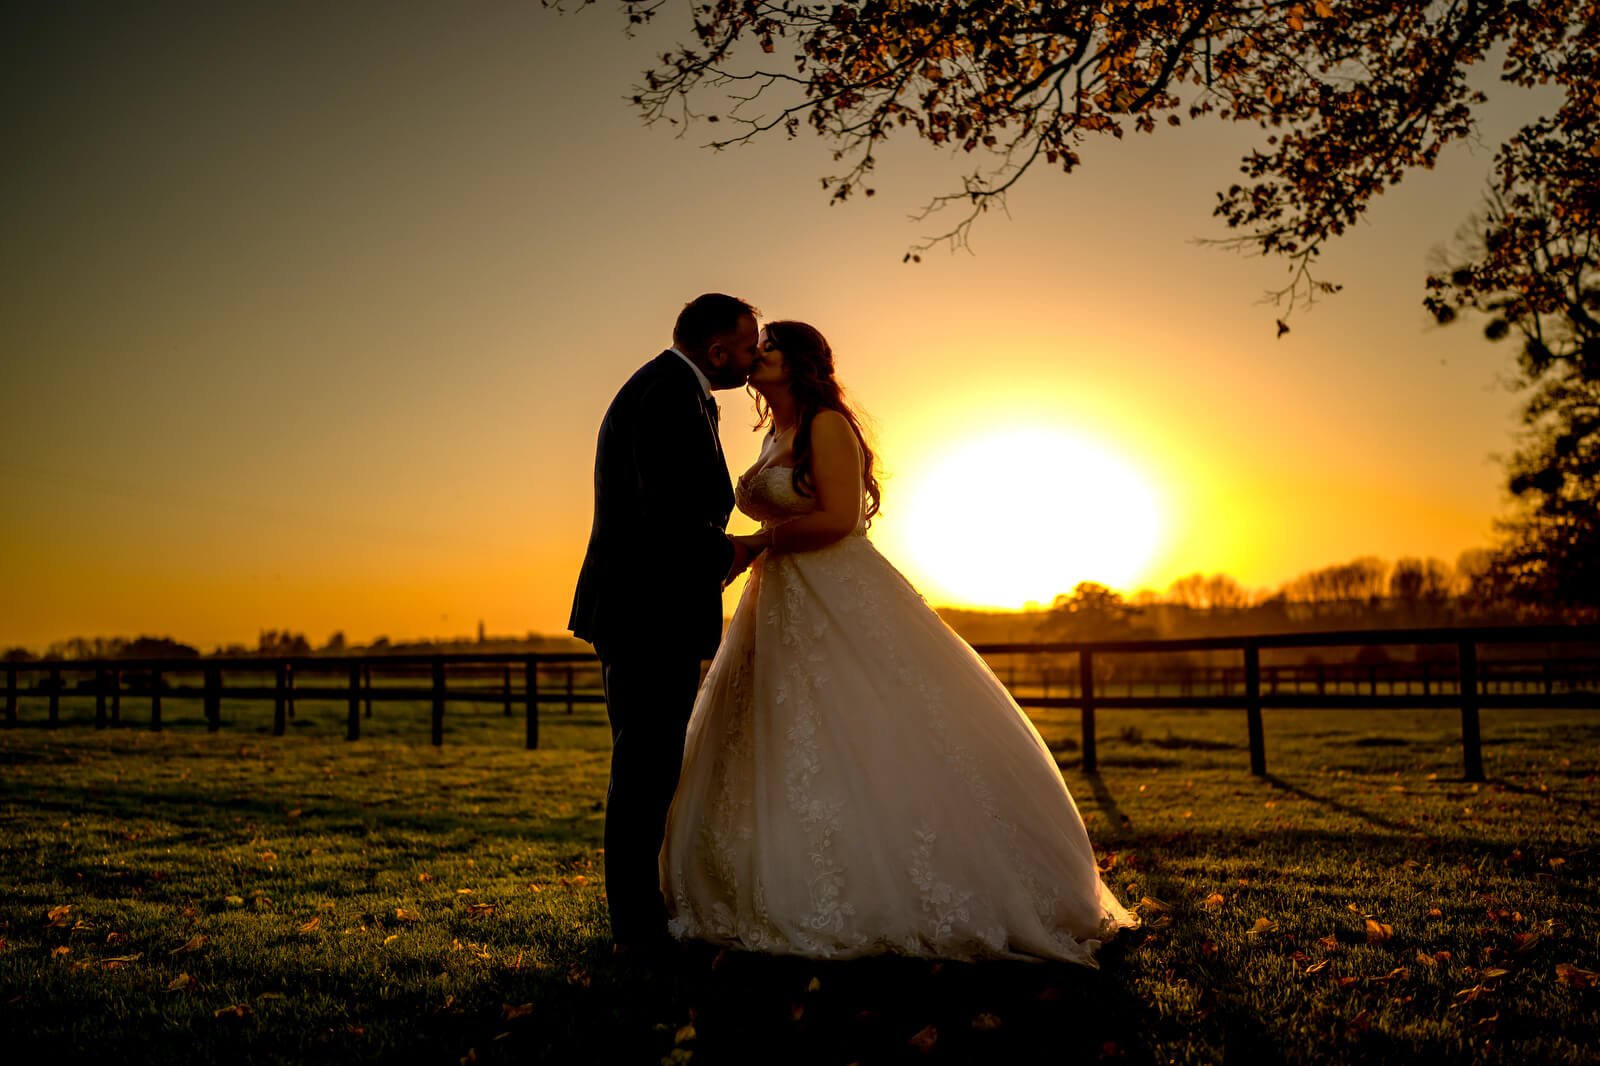 sunset wedding photo at barford park in Downton